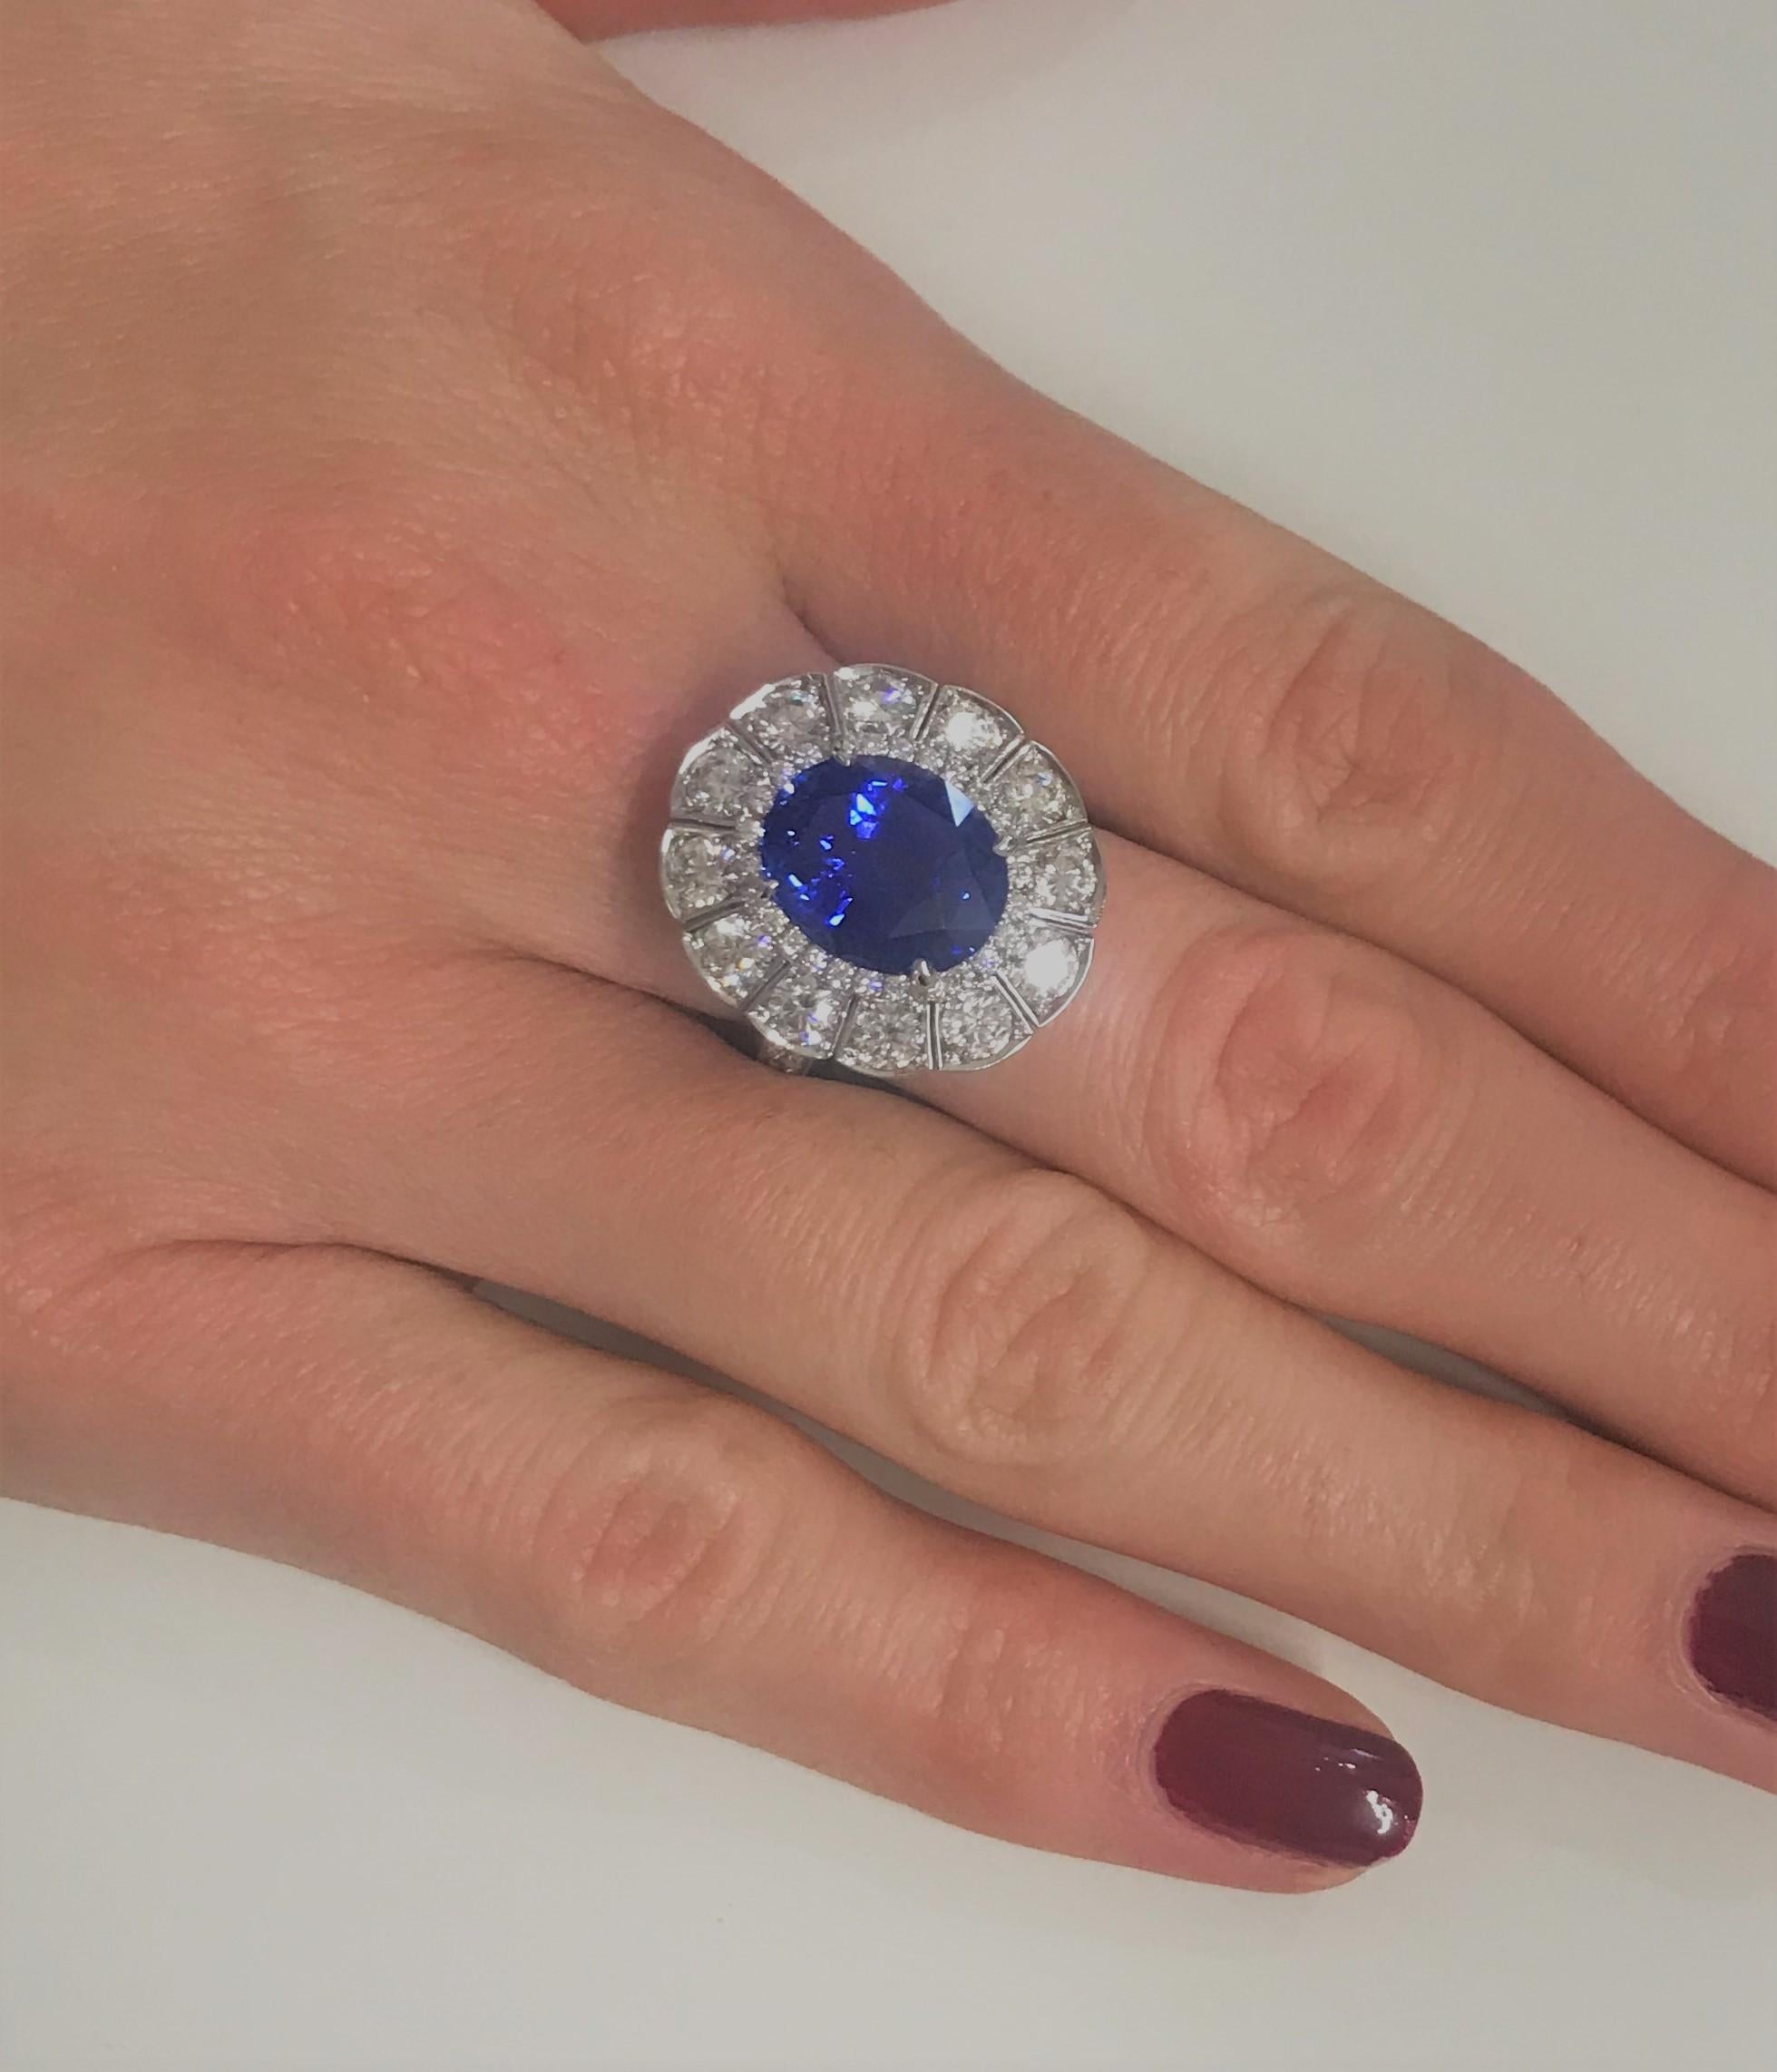 A House of Garrard platinum ring from the Jewelled Vault collection, set with a central GRS certified oval 6.01 carat sapphire and 48 round white diamonds weighing 2.15 carats. 
1 oval sapphire weighing 6.01 carat GRS certified 'Origin Madagascar,